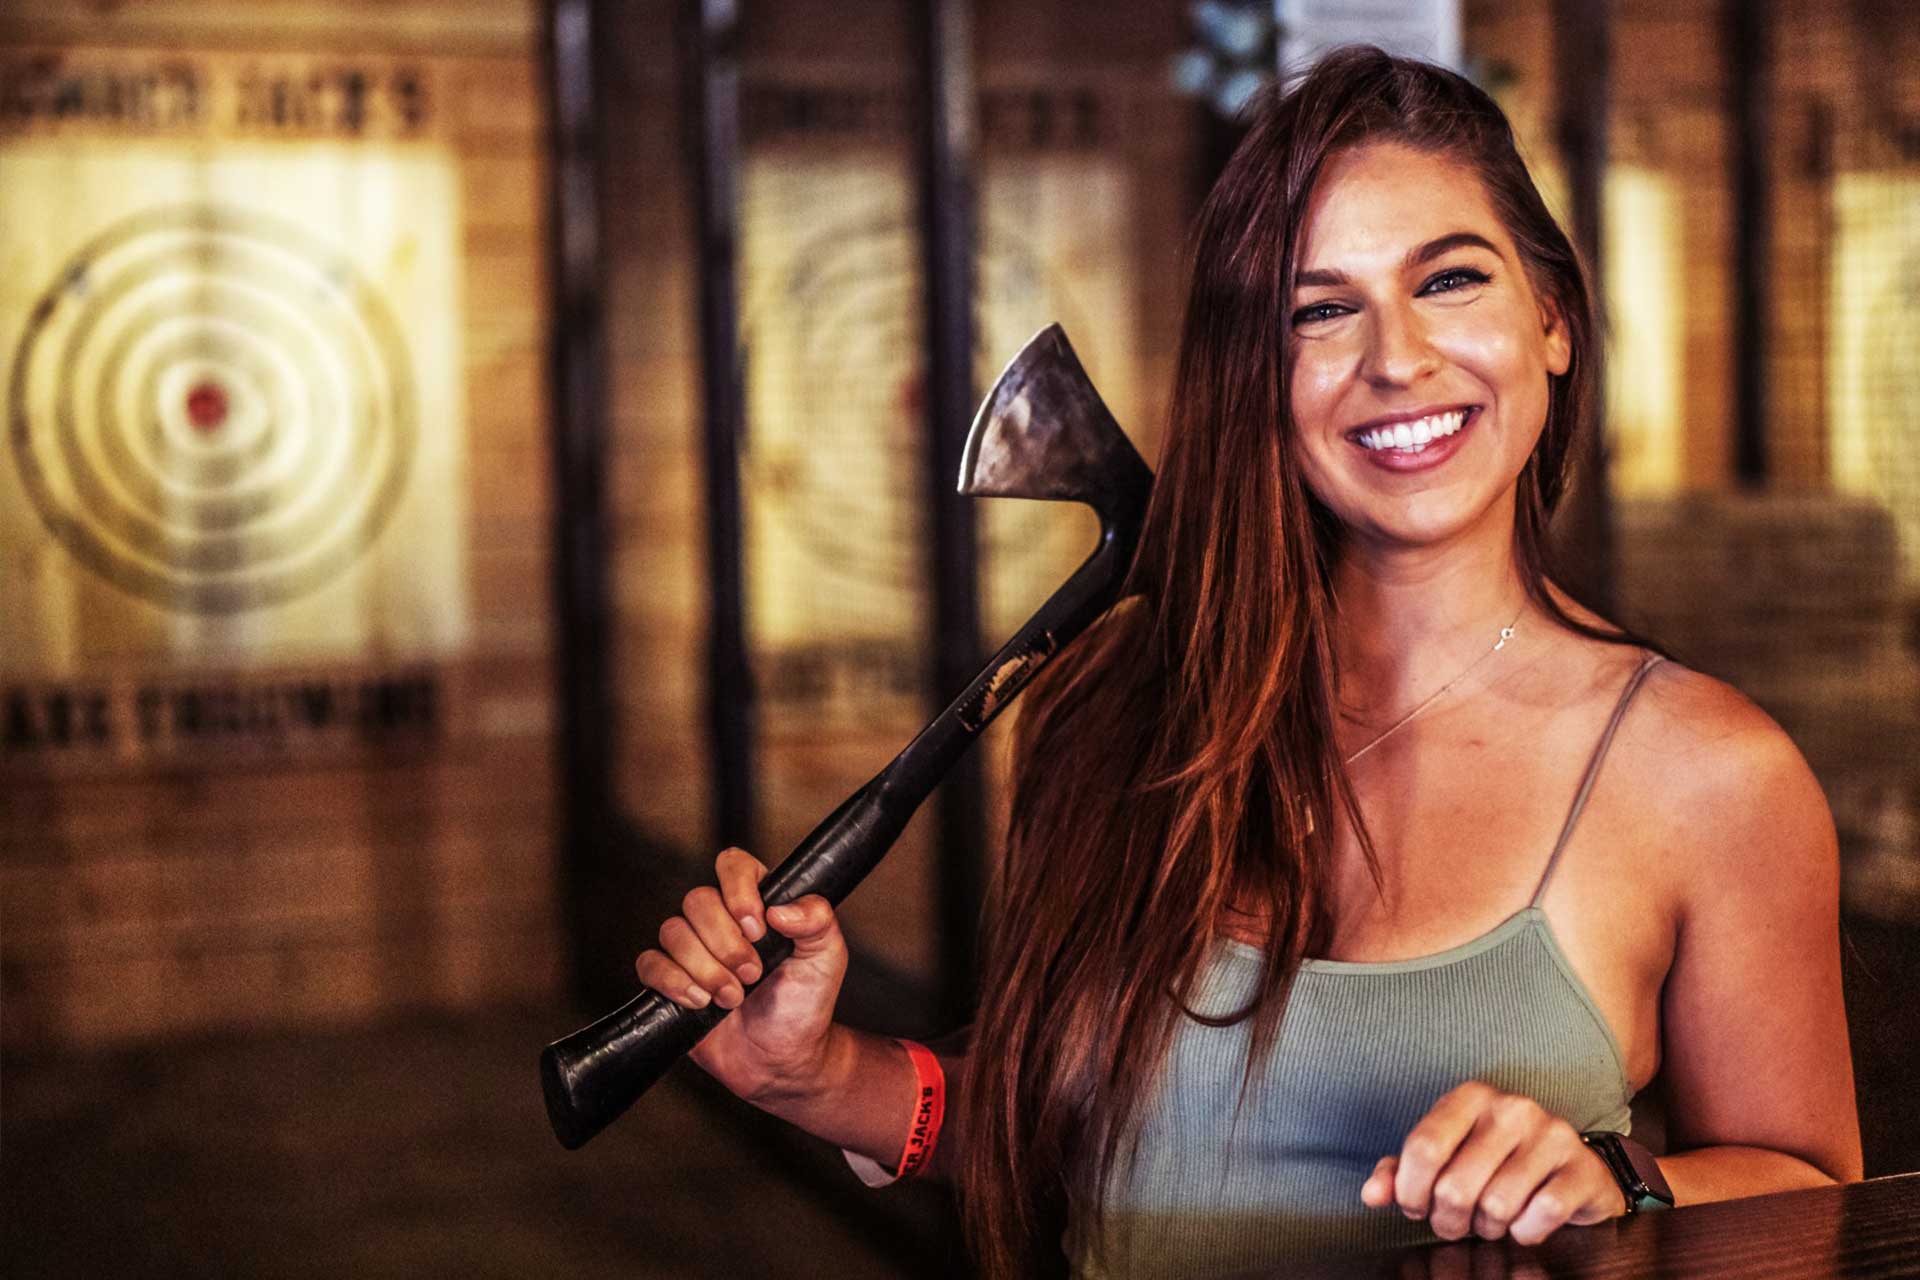 What to wear axe throwing